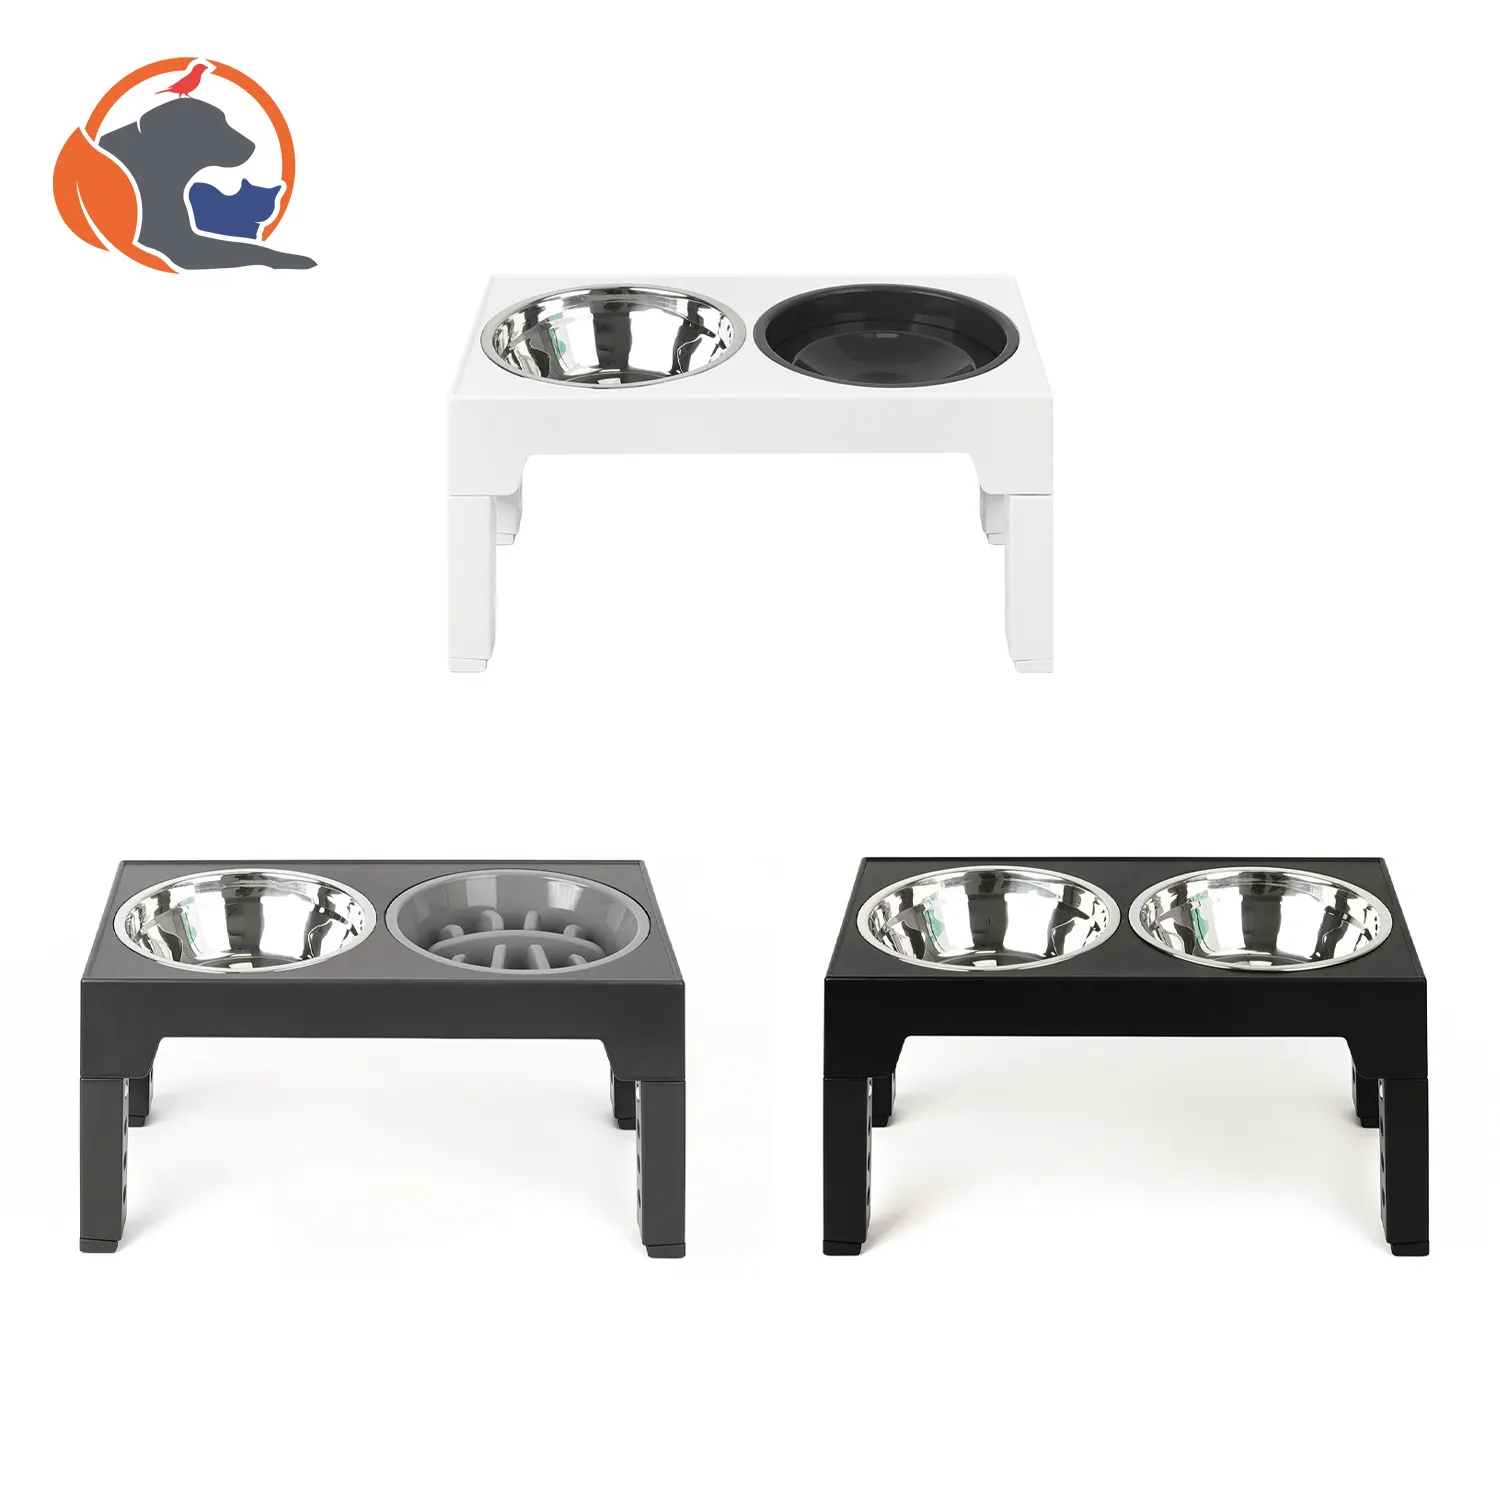 New Design Adjustable Elevated Dog Bowl Table,High Dog Food Bowl,Double Adjustable Elevated Raised Luxury Pet Cat Dog Bowl Stand